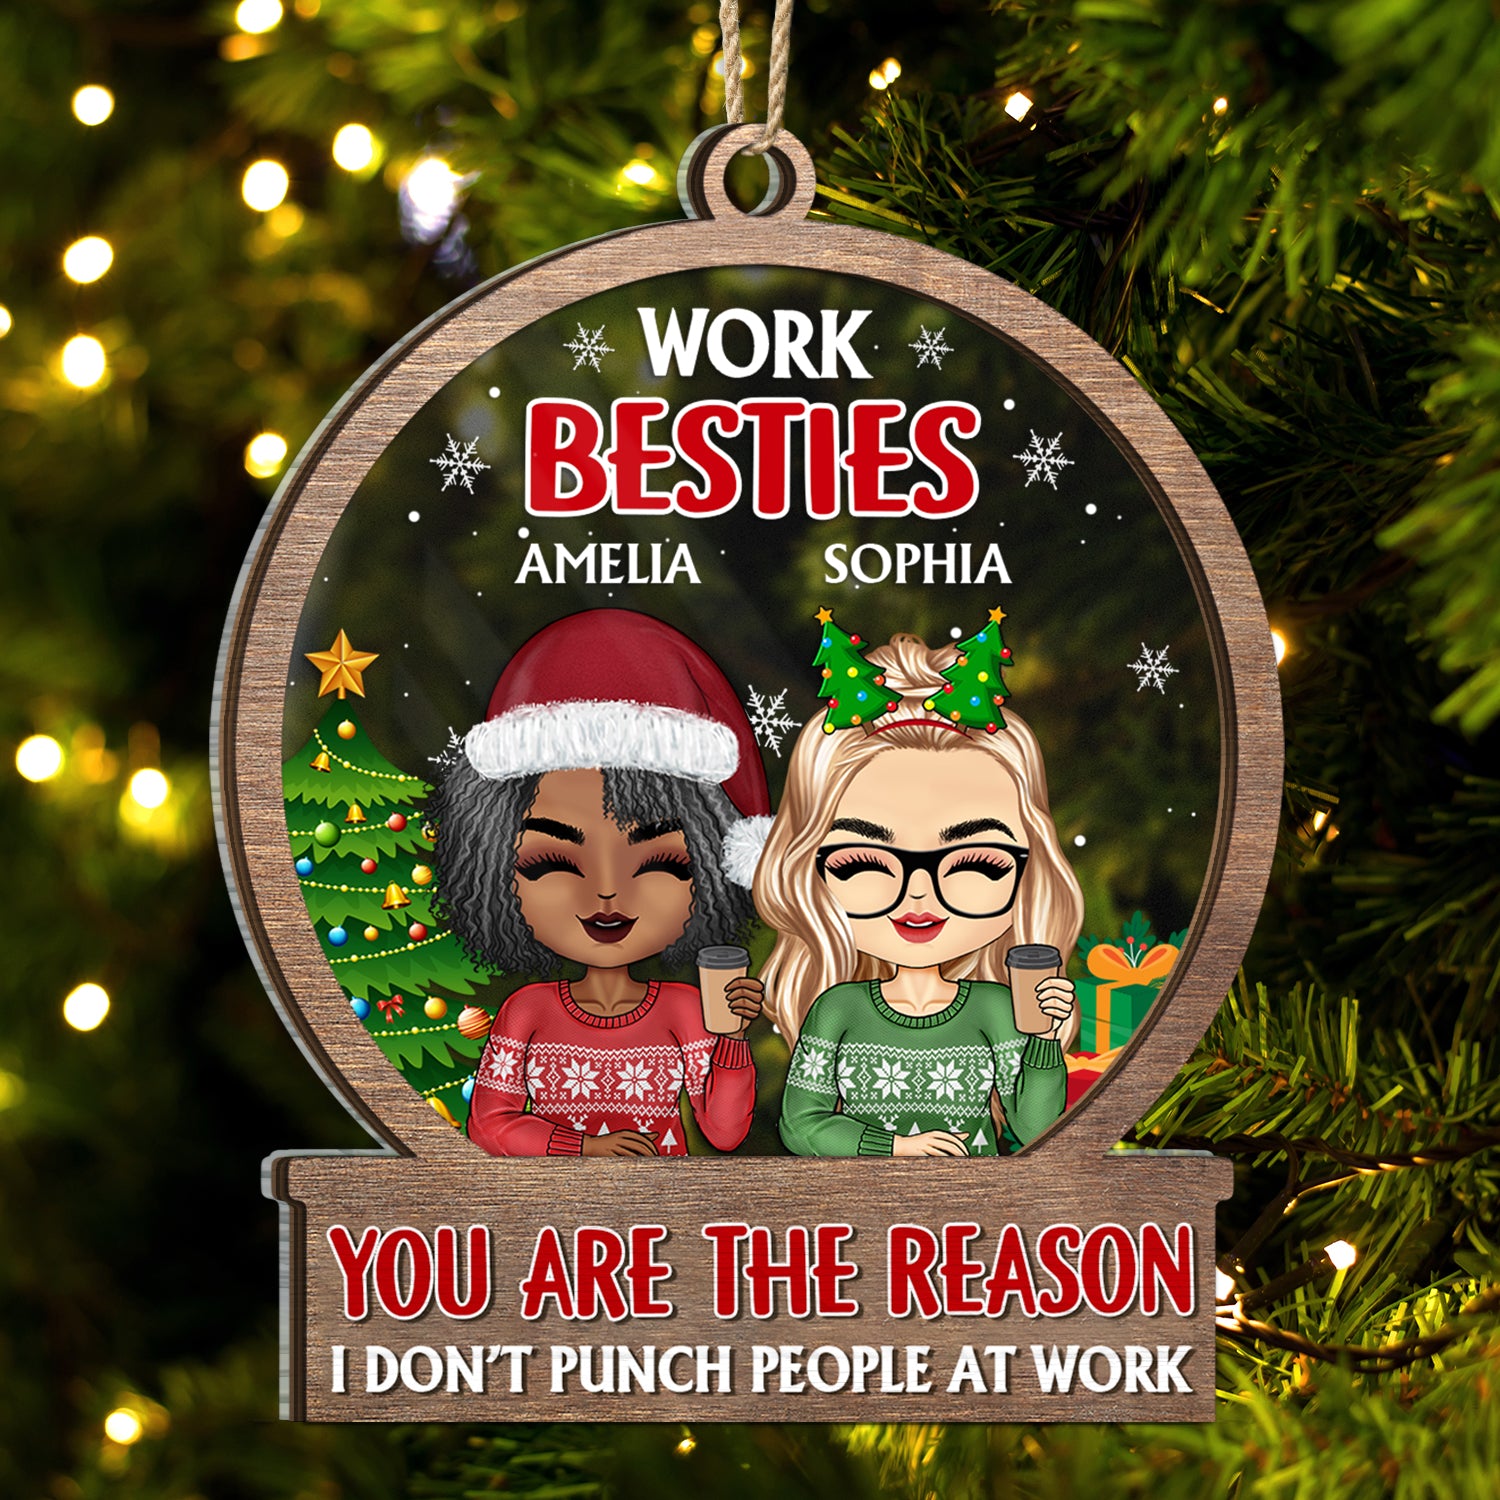 You Are The Reason I Don't Punch People At Work - Christmas Gifts For Colleagues, Coworker, Besties - Personalized 2-Layered Mix Ornament